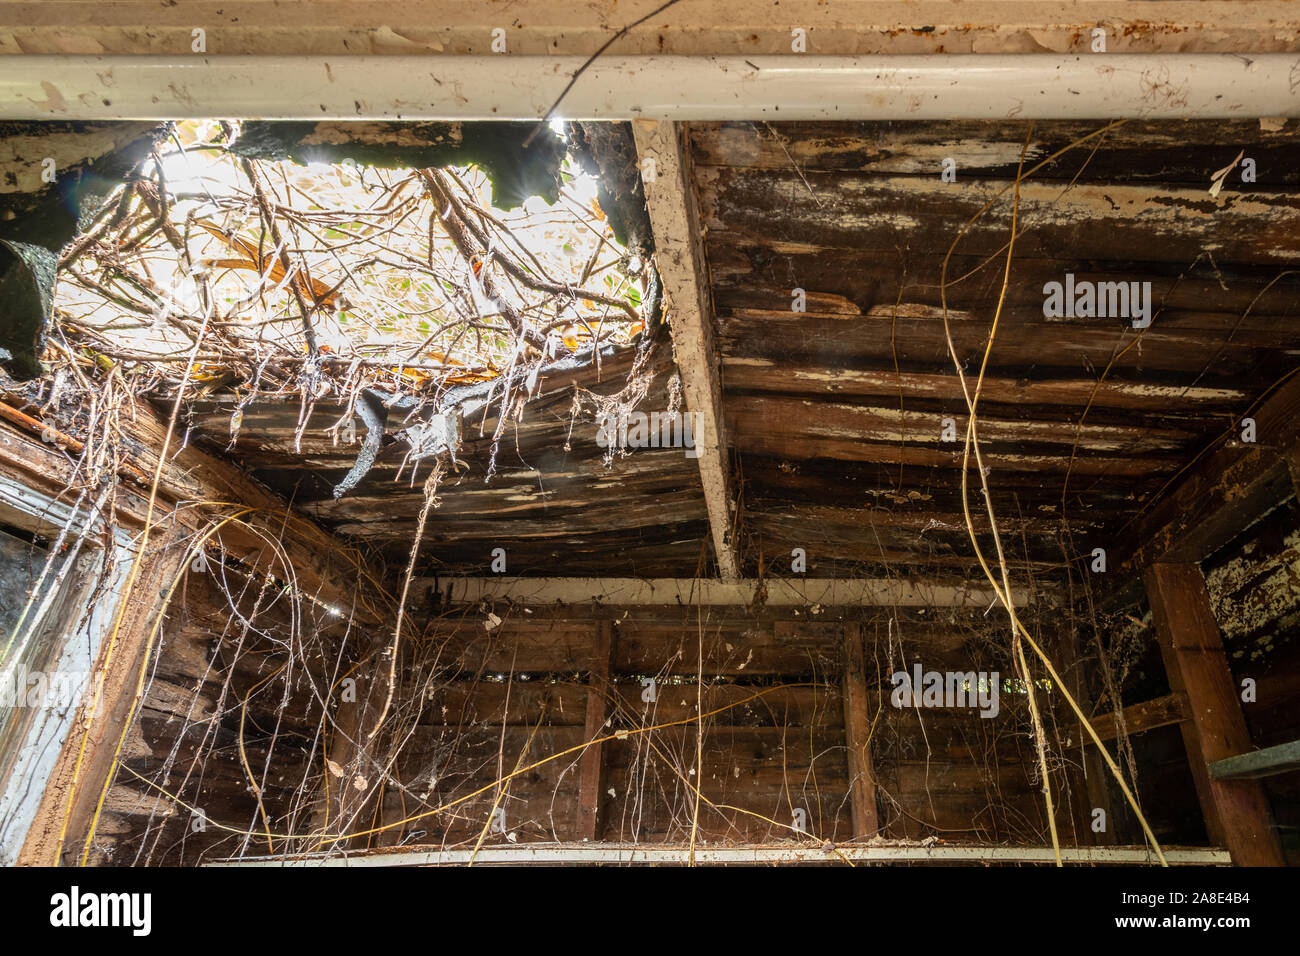 Old garden shed interior with rotten wooden boards, holes in the roof and vegetation coming in Stock Photo